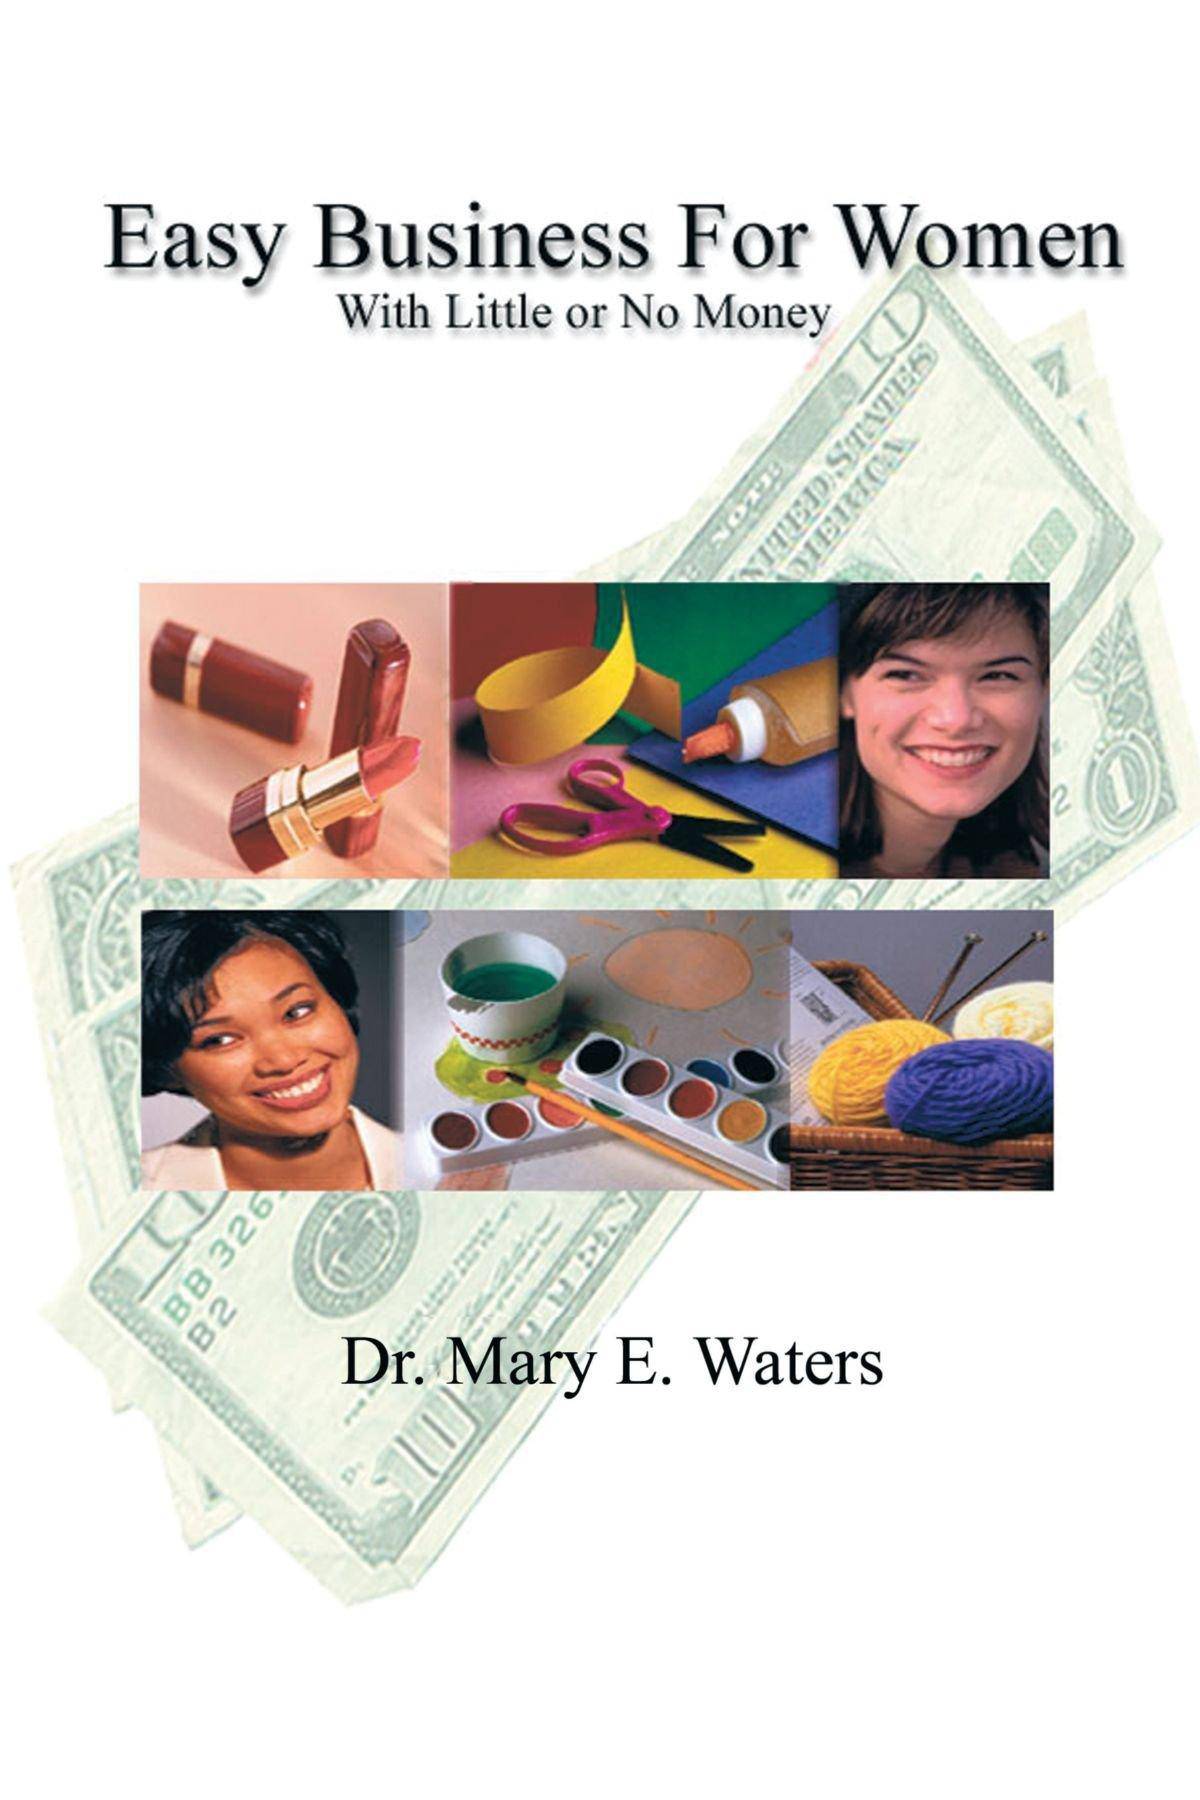 Easy Business For Women With Little Or No Money - SureShot Books Publishing LLC